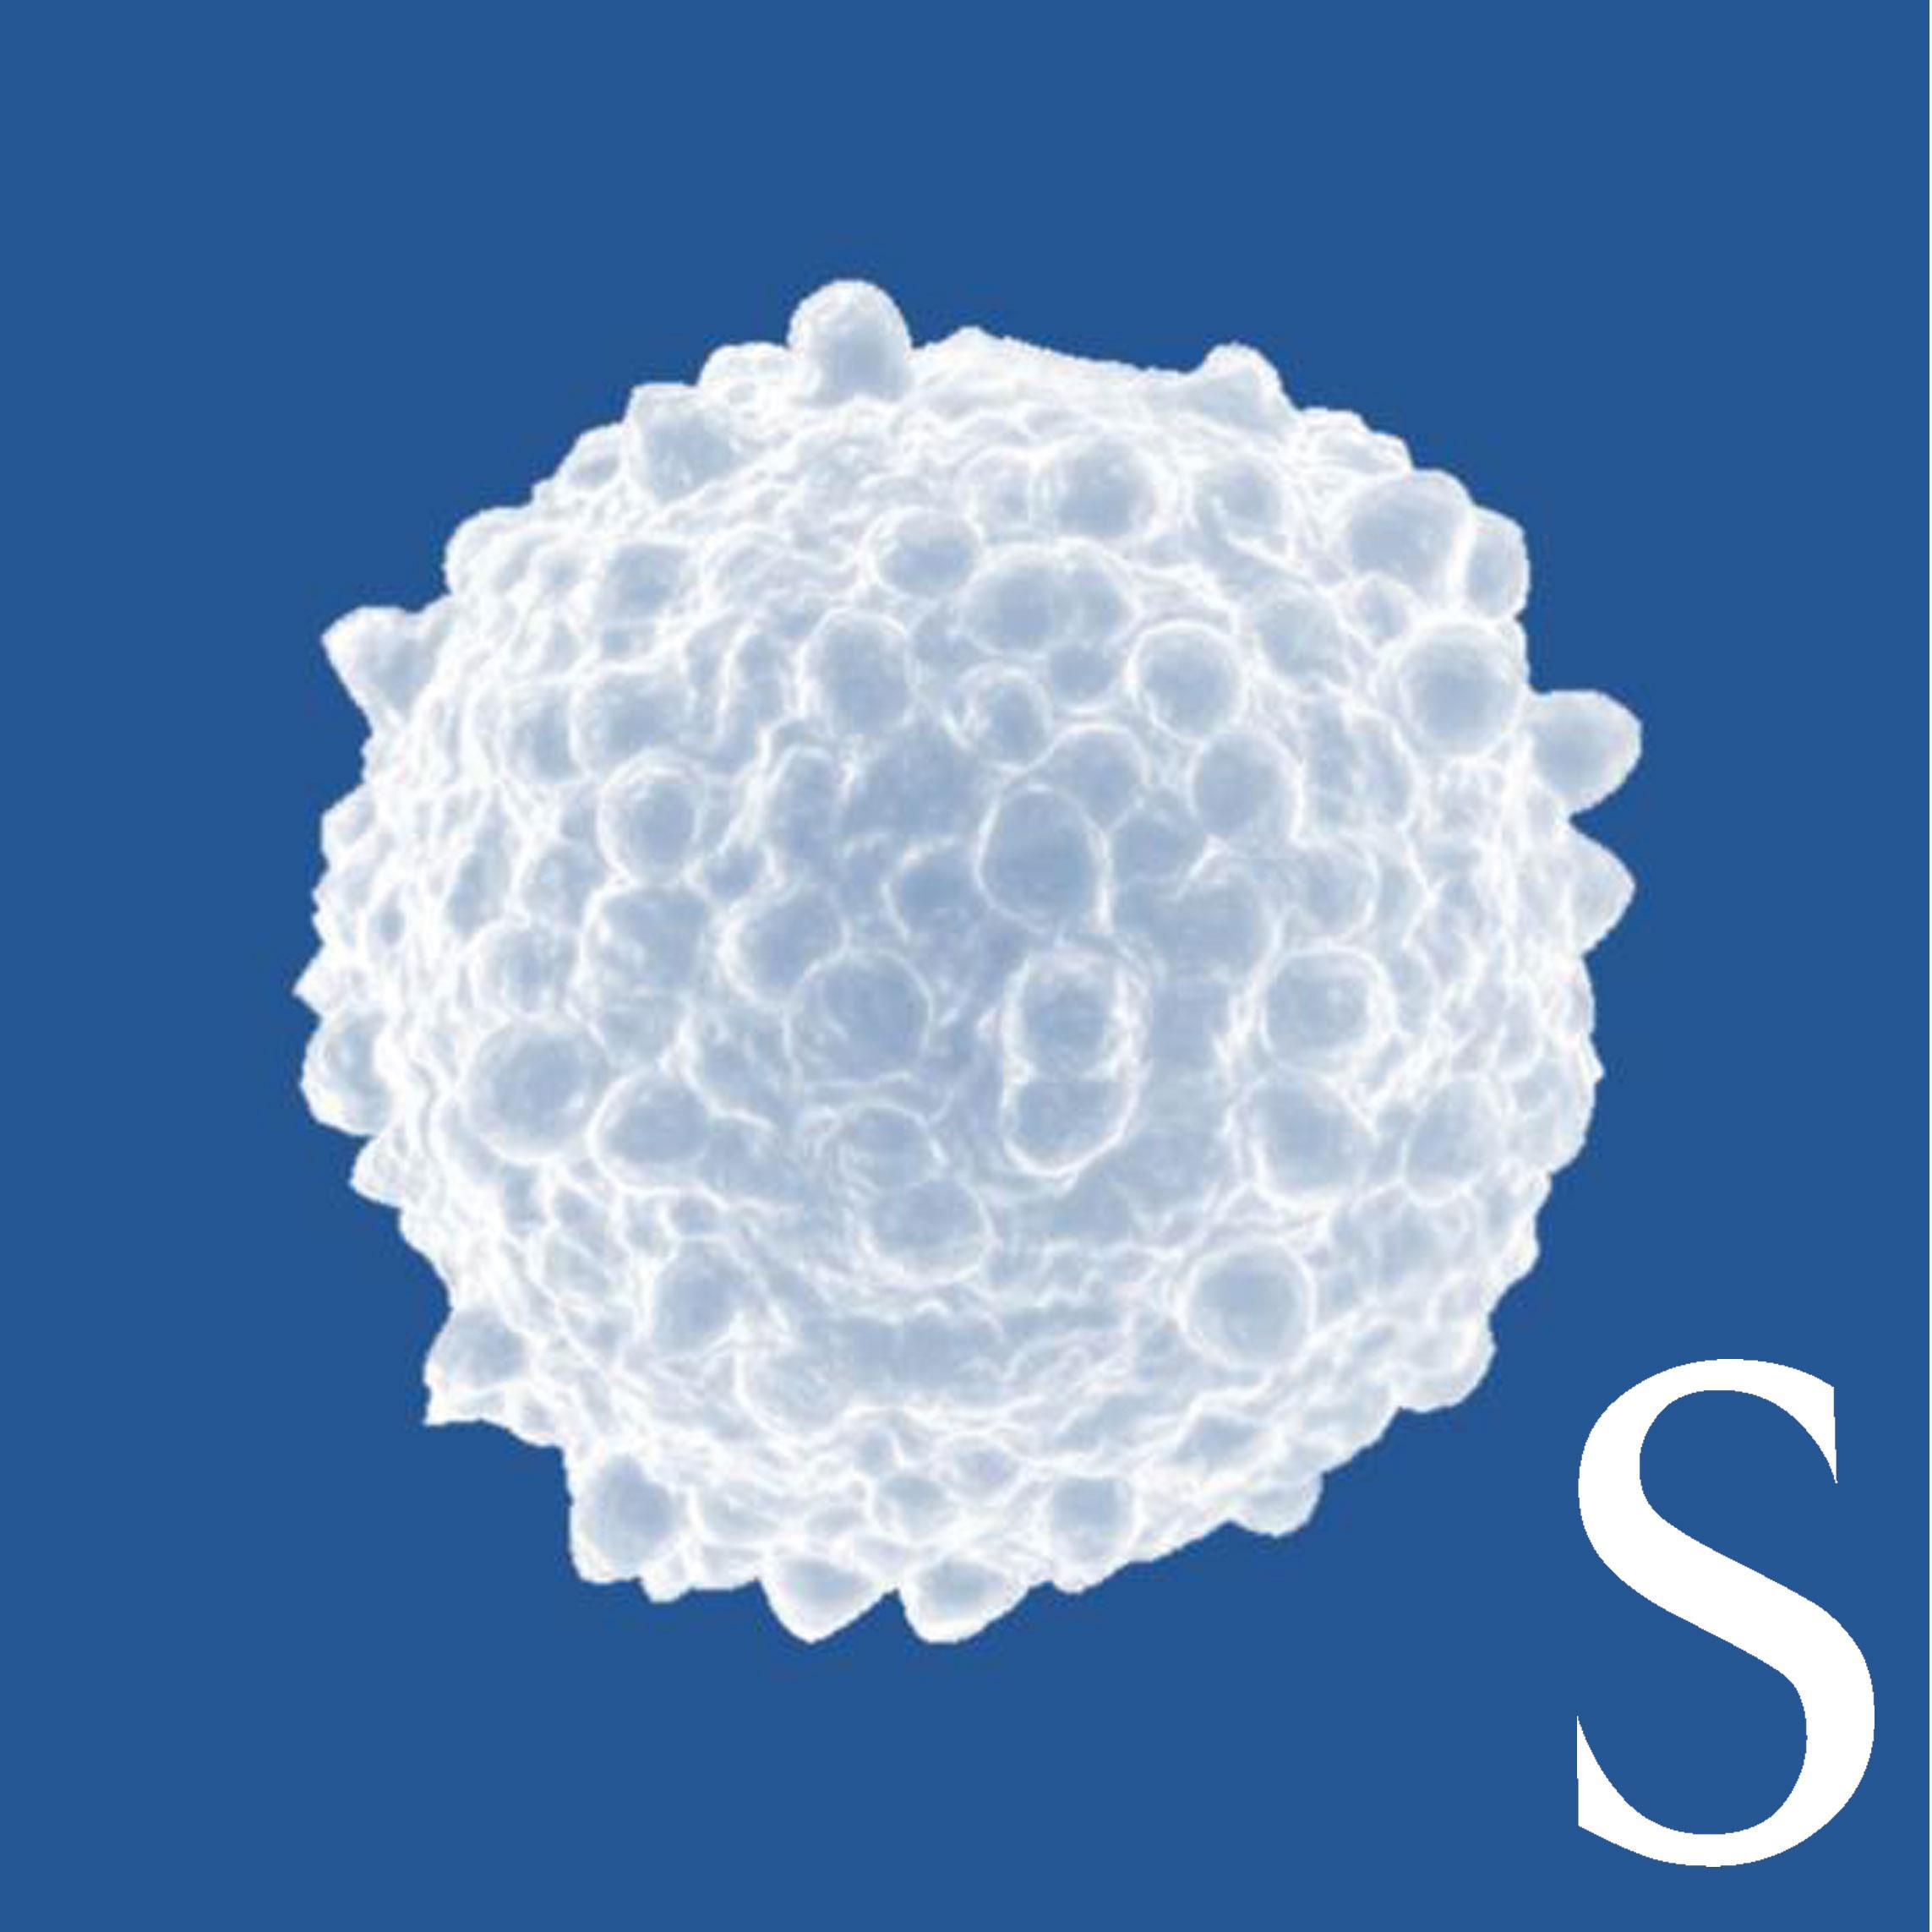 The University of Southampton is building on over 40 years of research excellence, harnessing the power of your immune system in the fight against cancer.